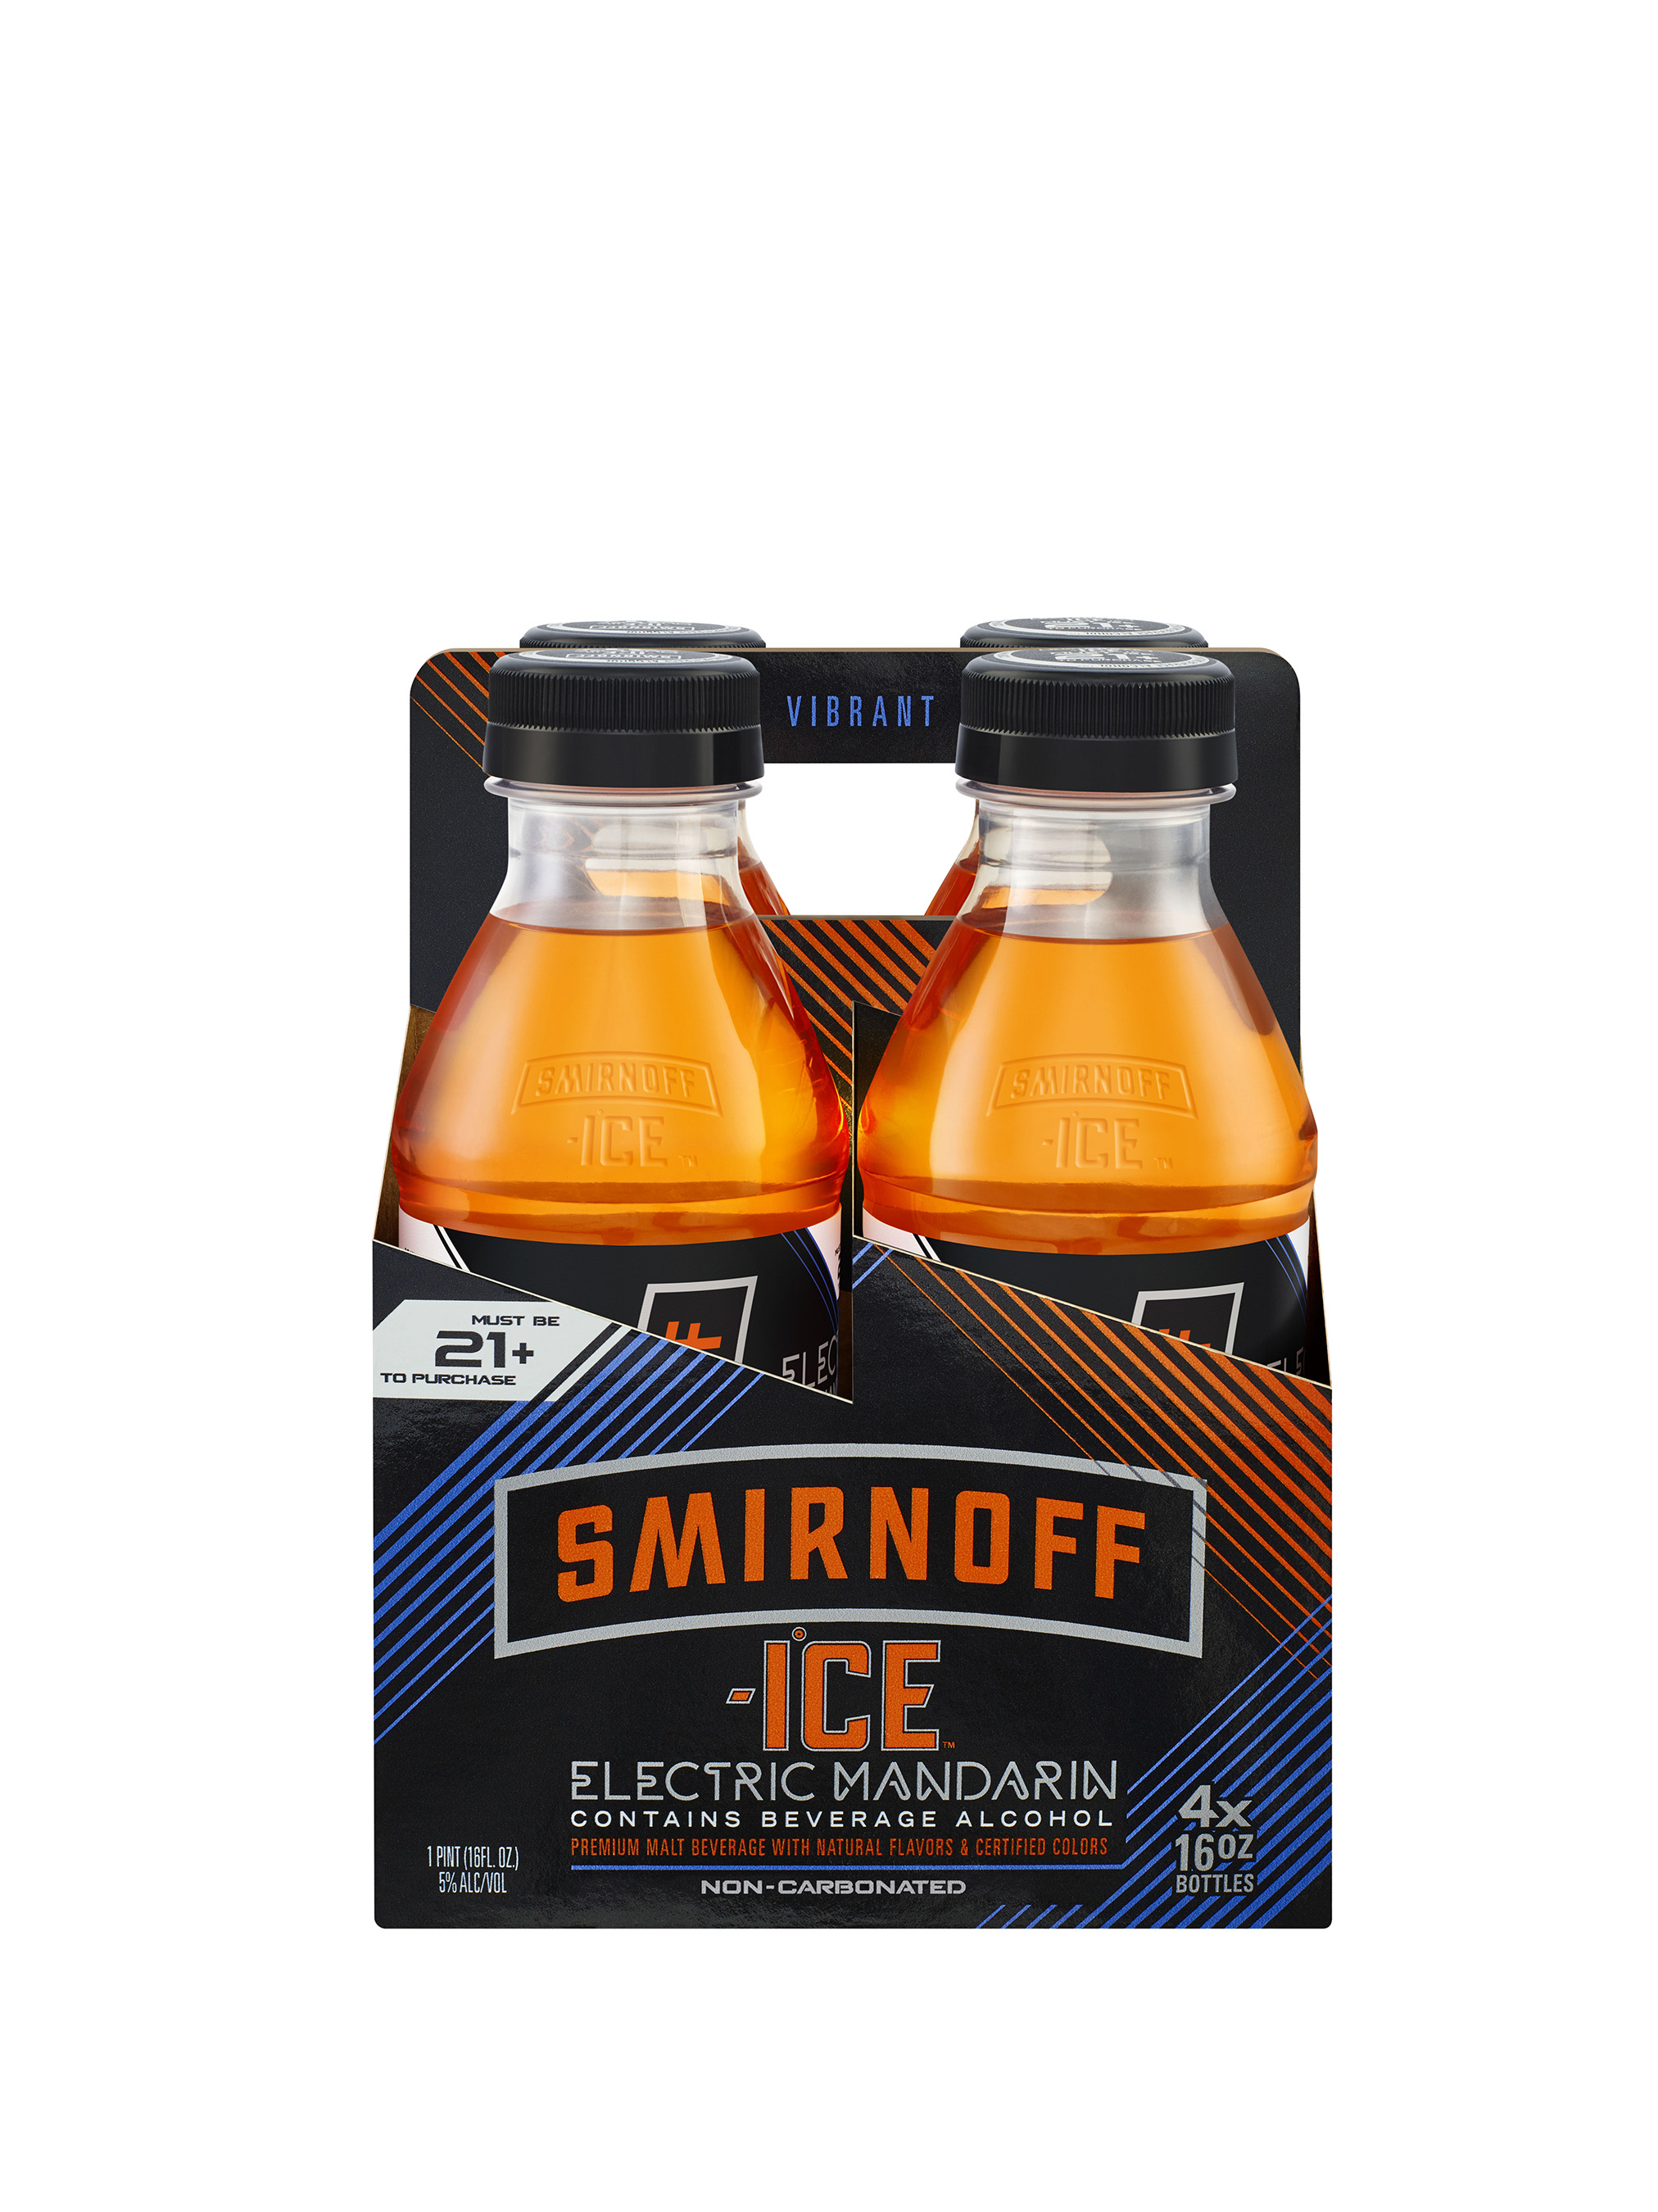 SMIRNOFF ICE "KEEPS IT MOVING" WITH ITS LATEST CAMPAIGN TO